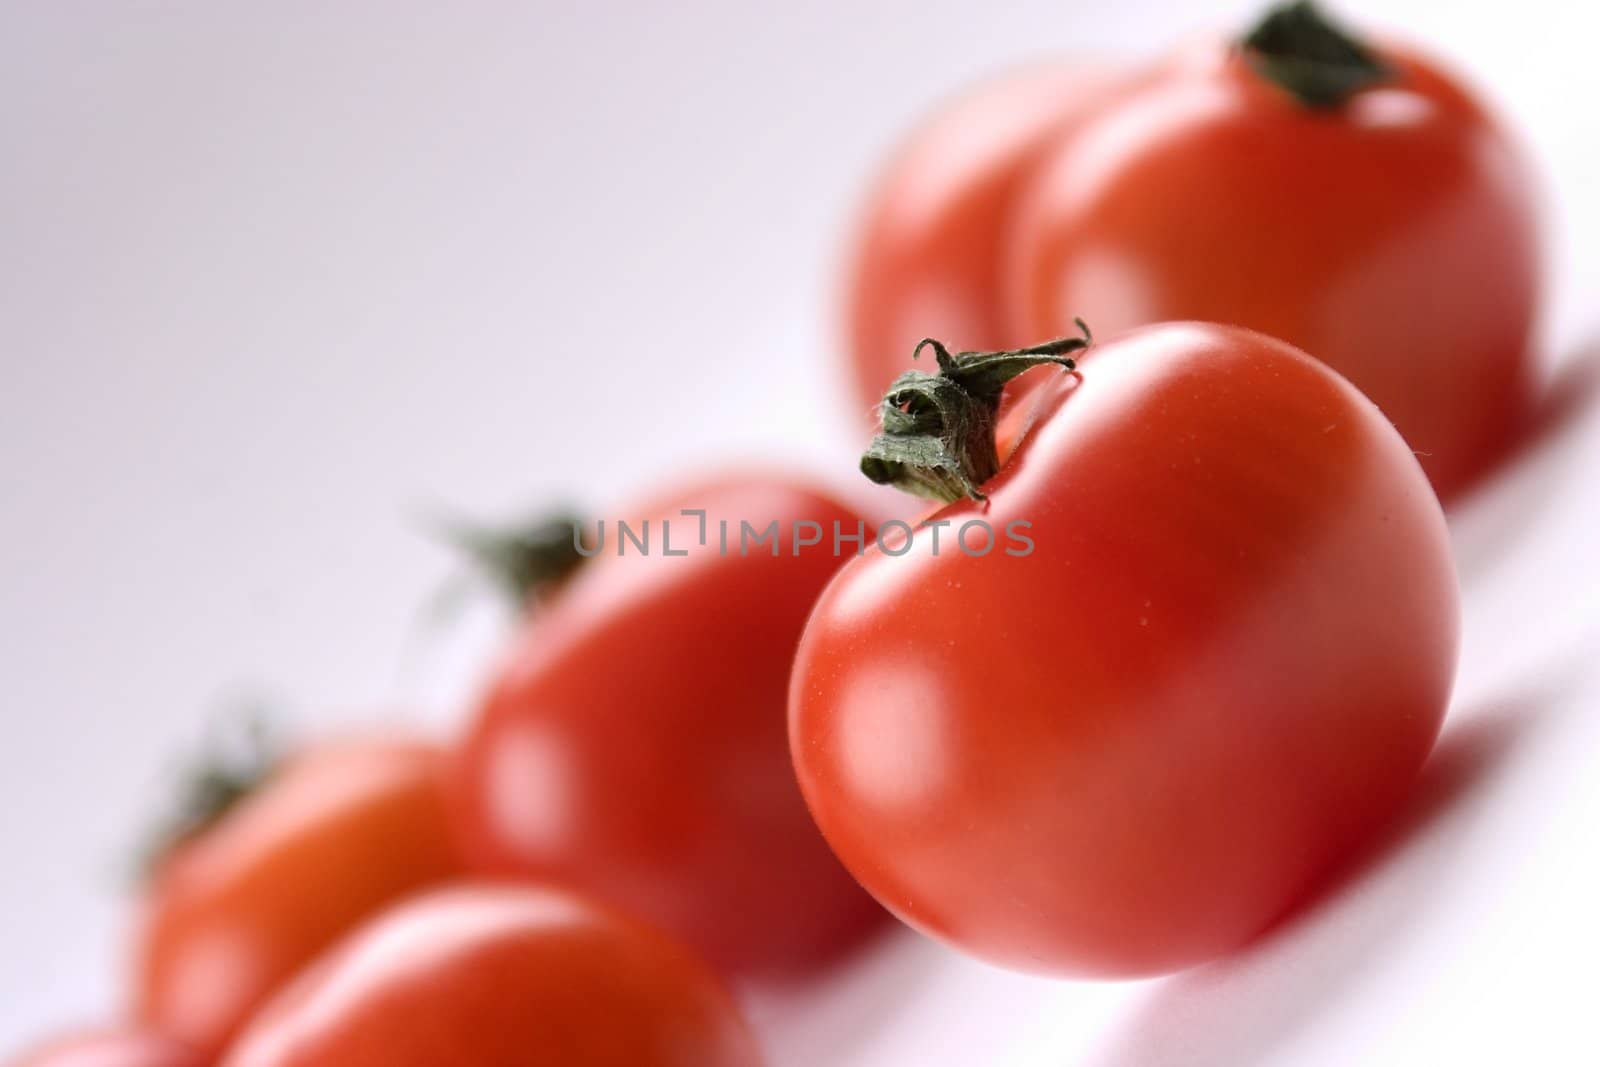 Tomatoes by litleskare